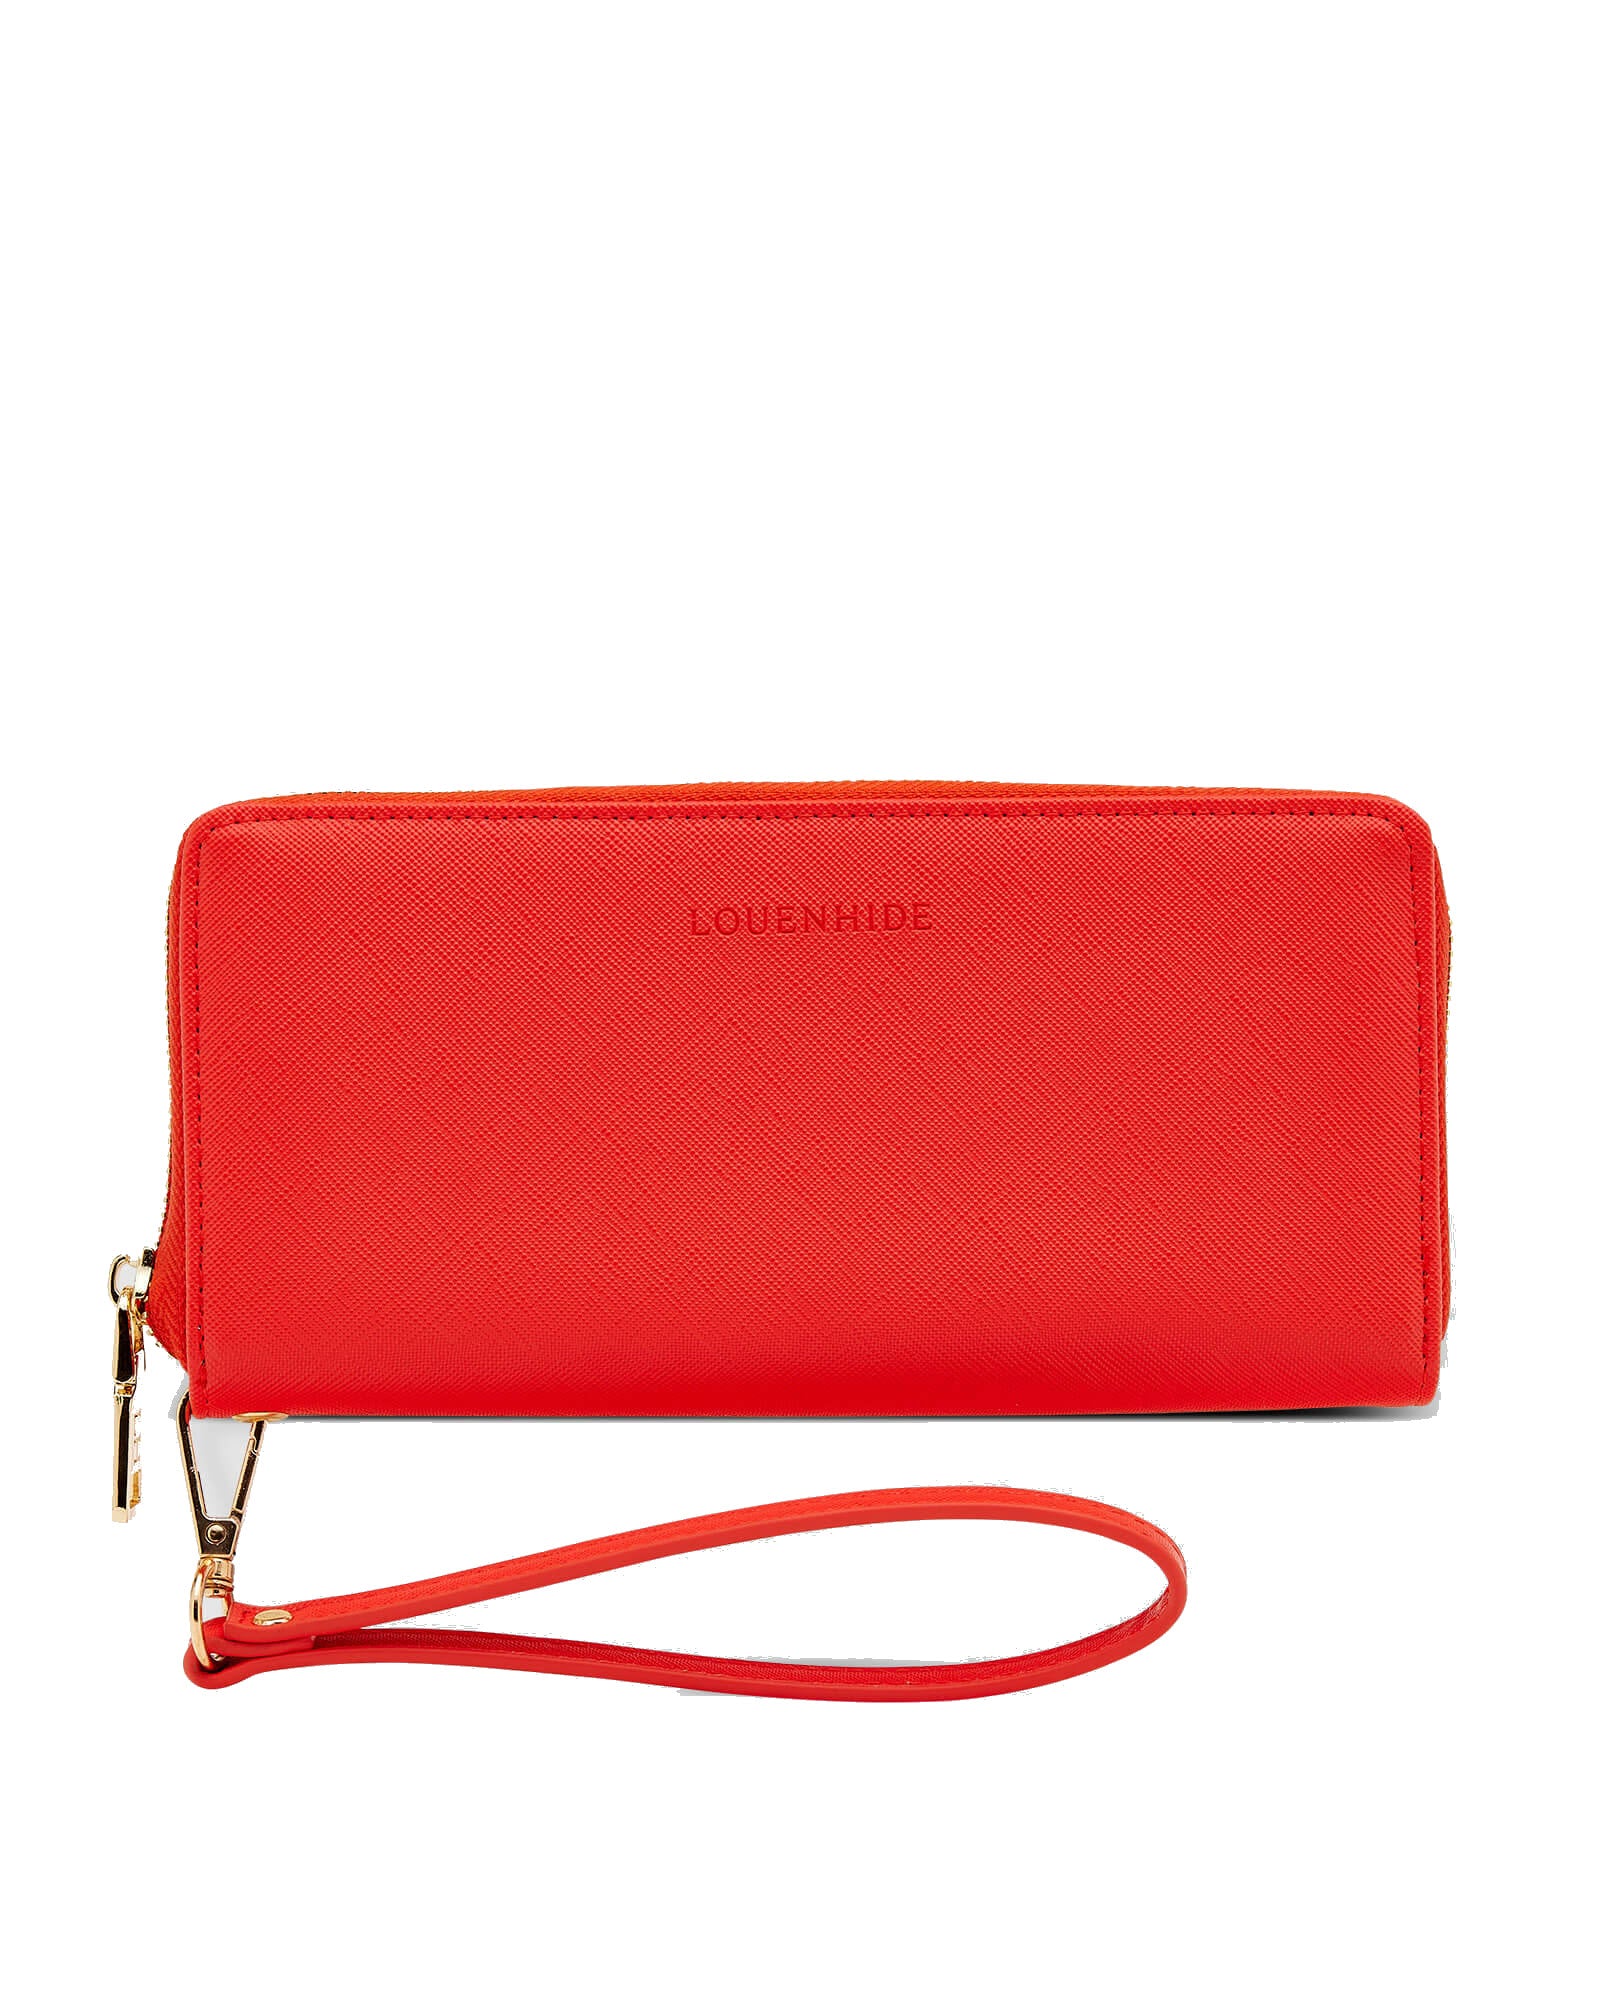 Red Louenhide Jessica wallet tangerine with a zipper and detachable wristlet on a white background.